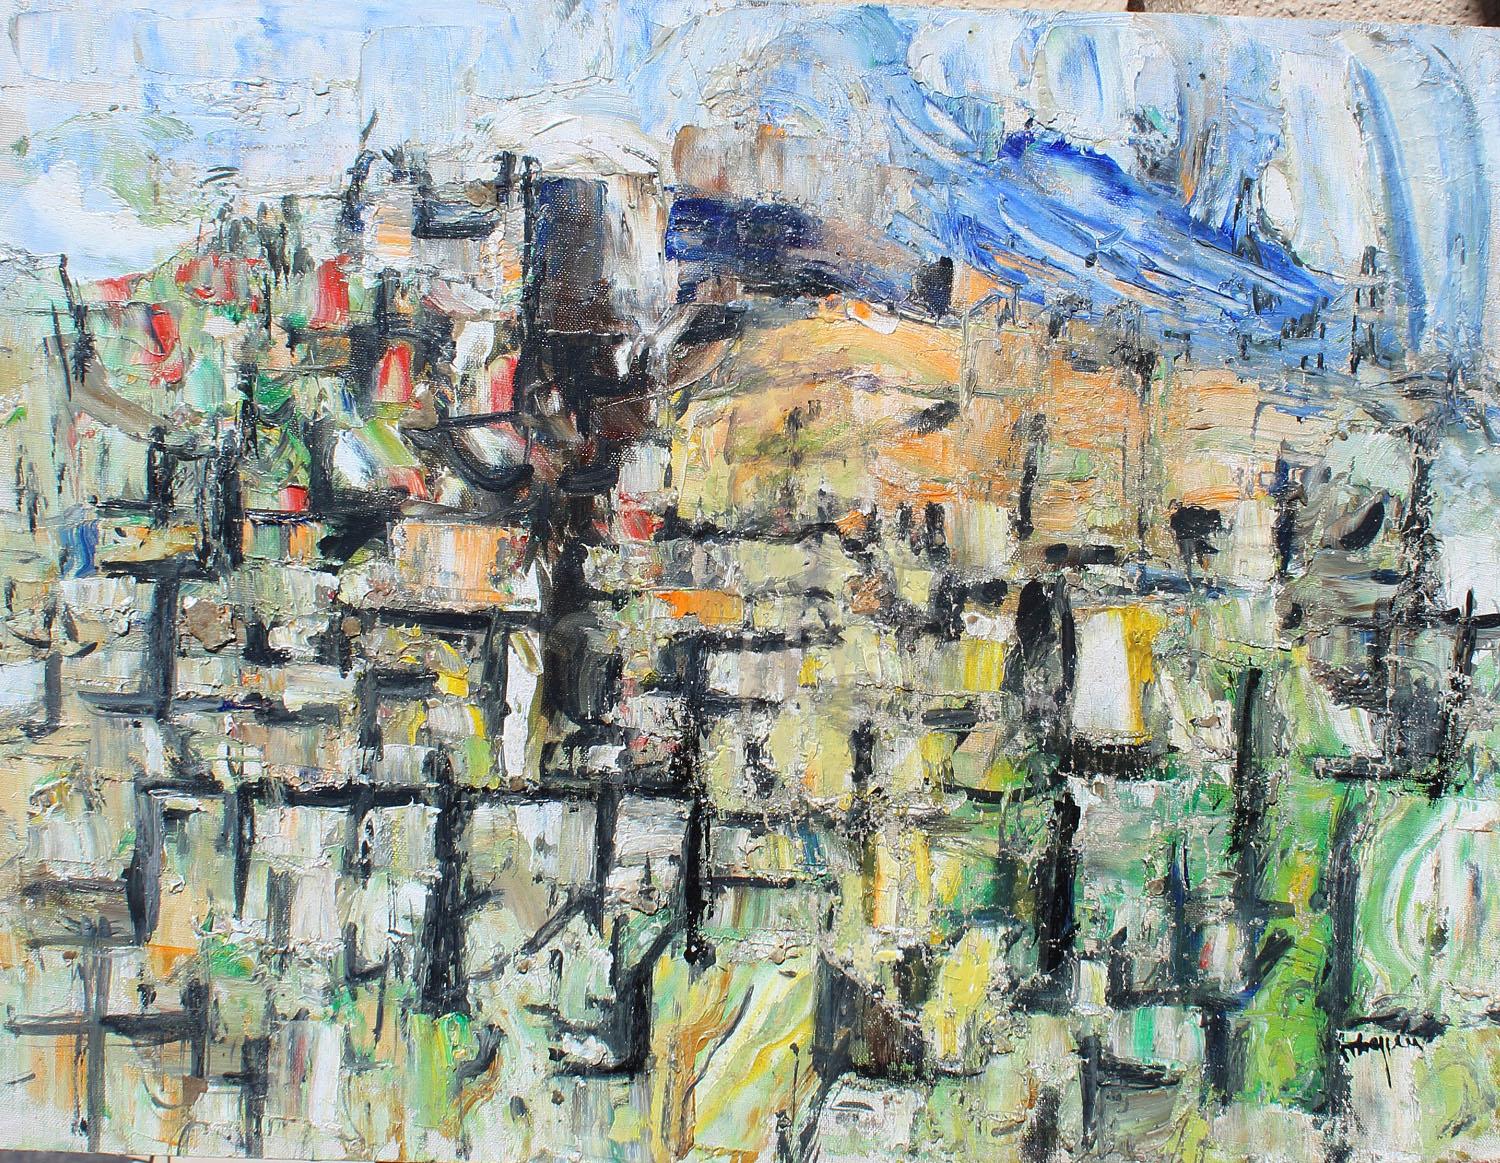 Overlook Mountain, archived no. 4206, 12x16 inches, oil on canvas.  - Abstract Painting by Arthur Pinajian